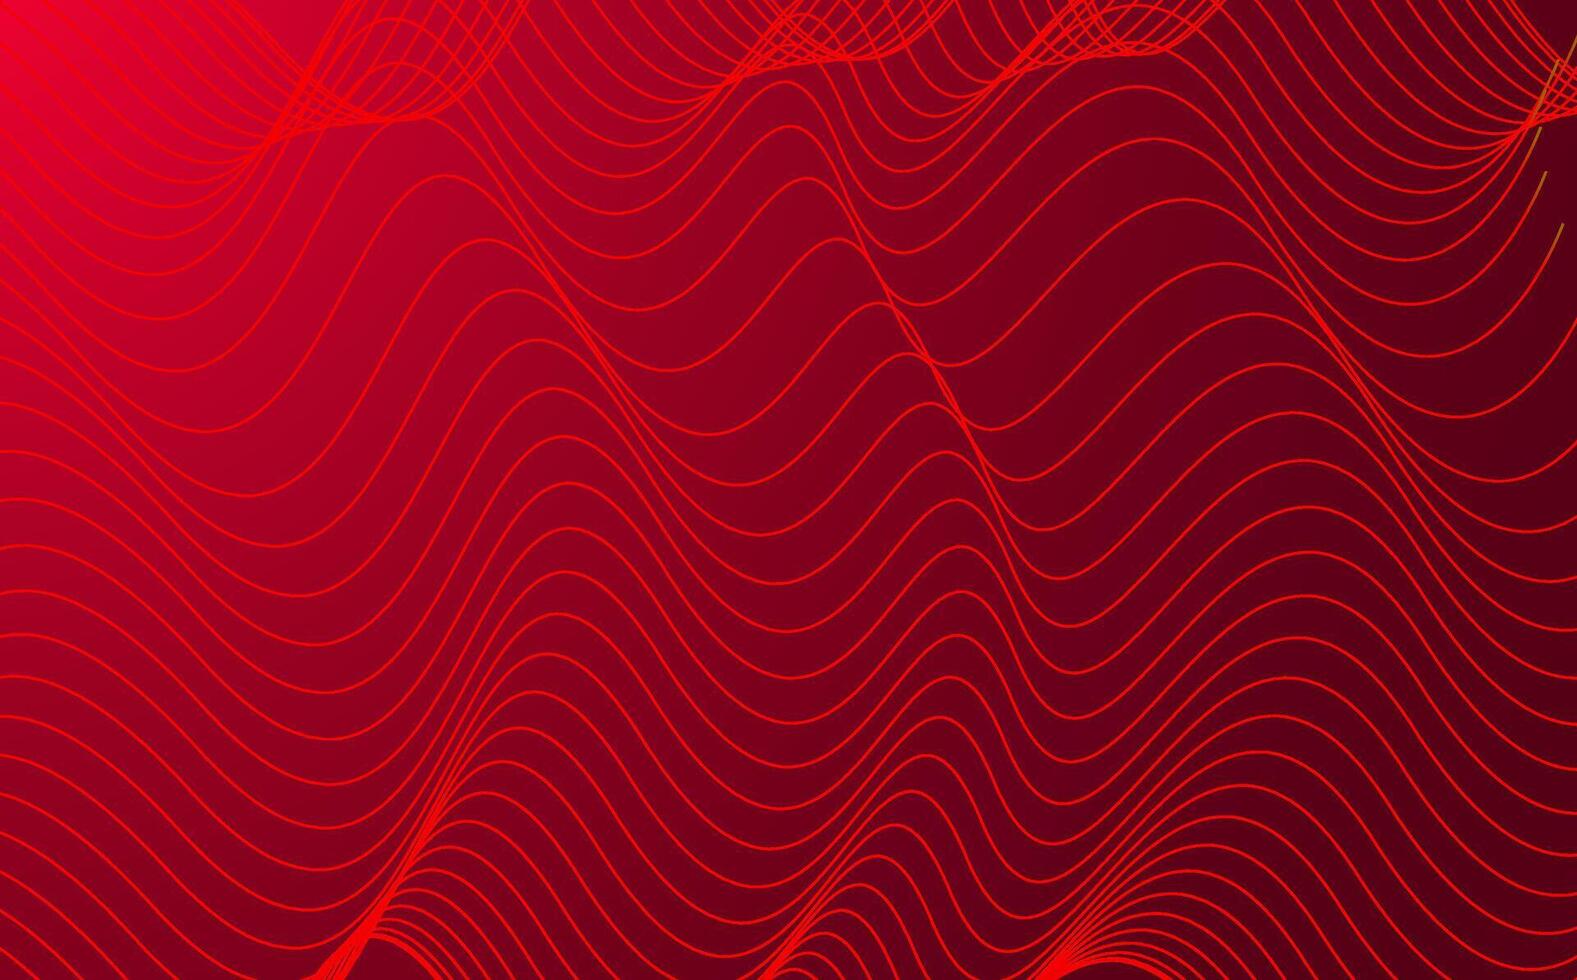 Abstract red line wavy vector background design